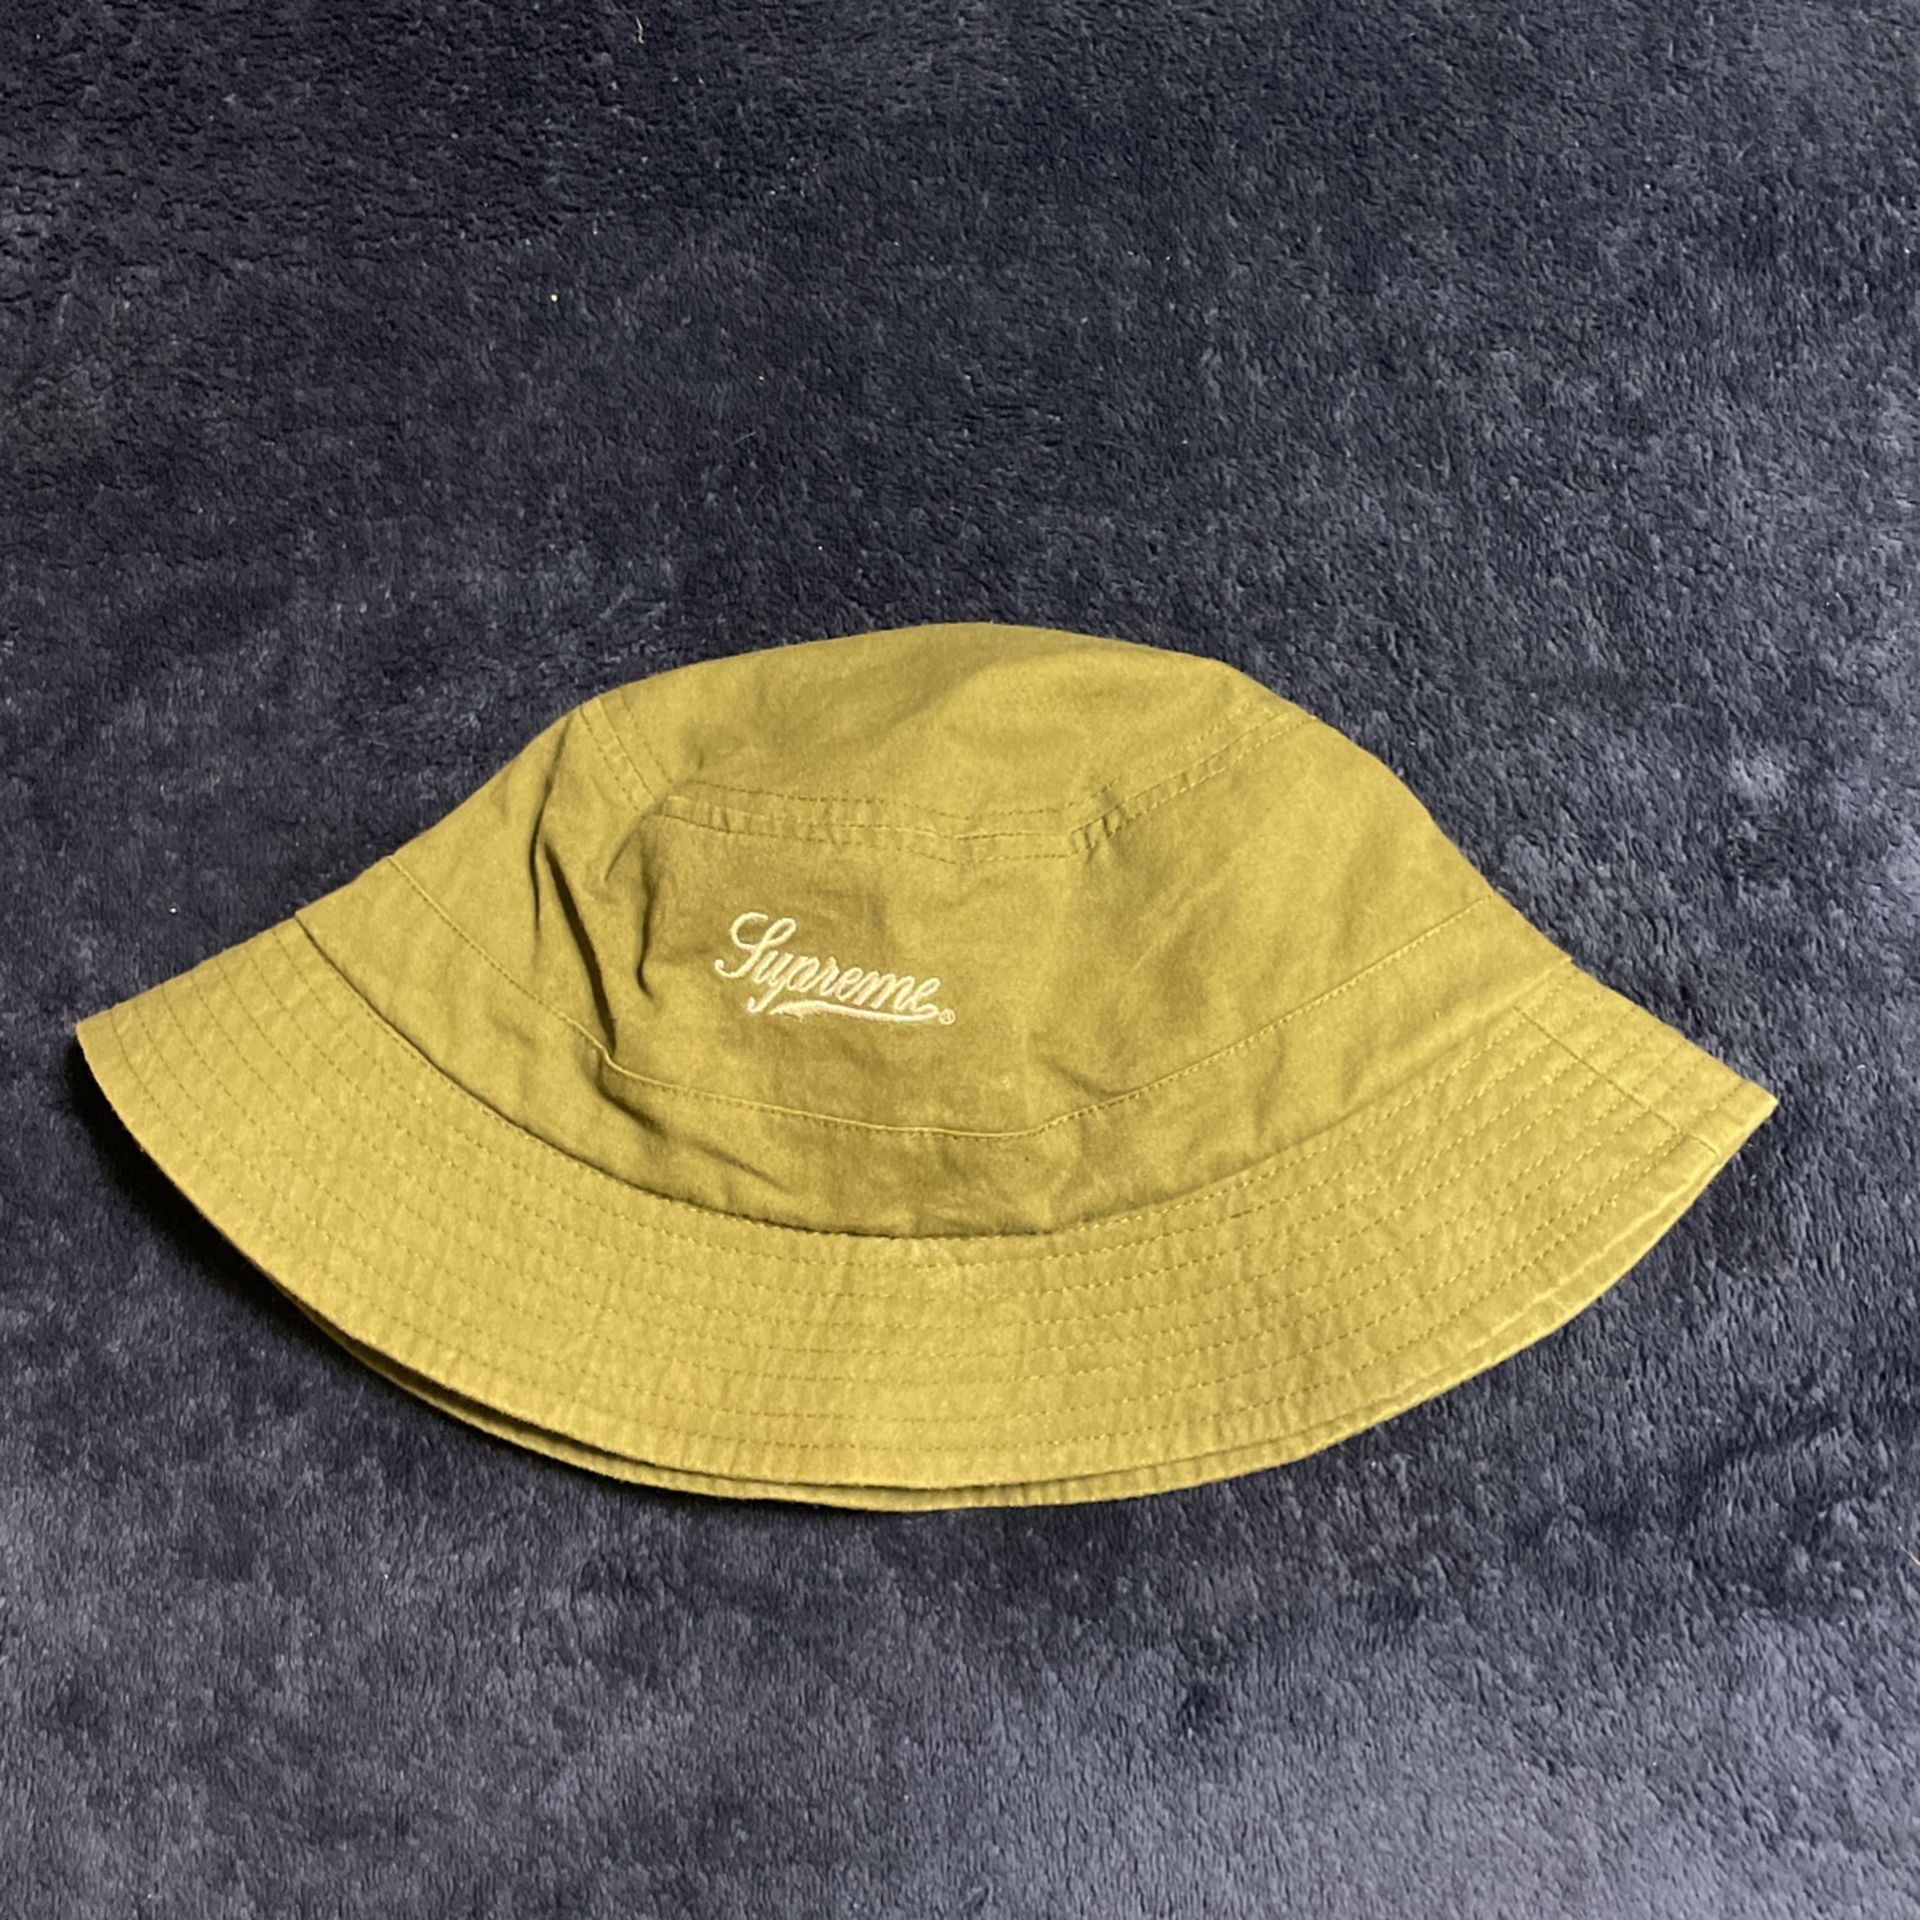 Authentic Supreme Green Bucket Hat for Sale in West Hills, CA - OfferUp